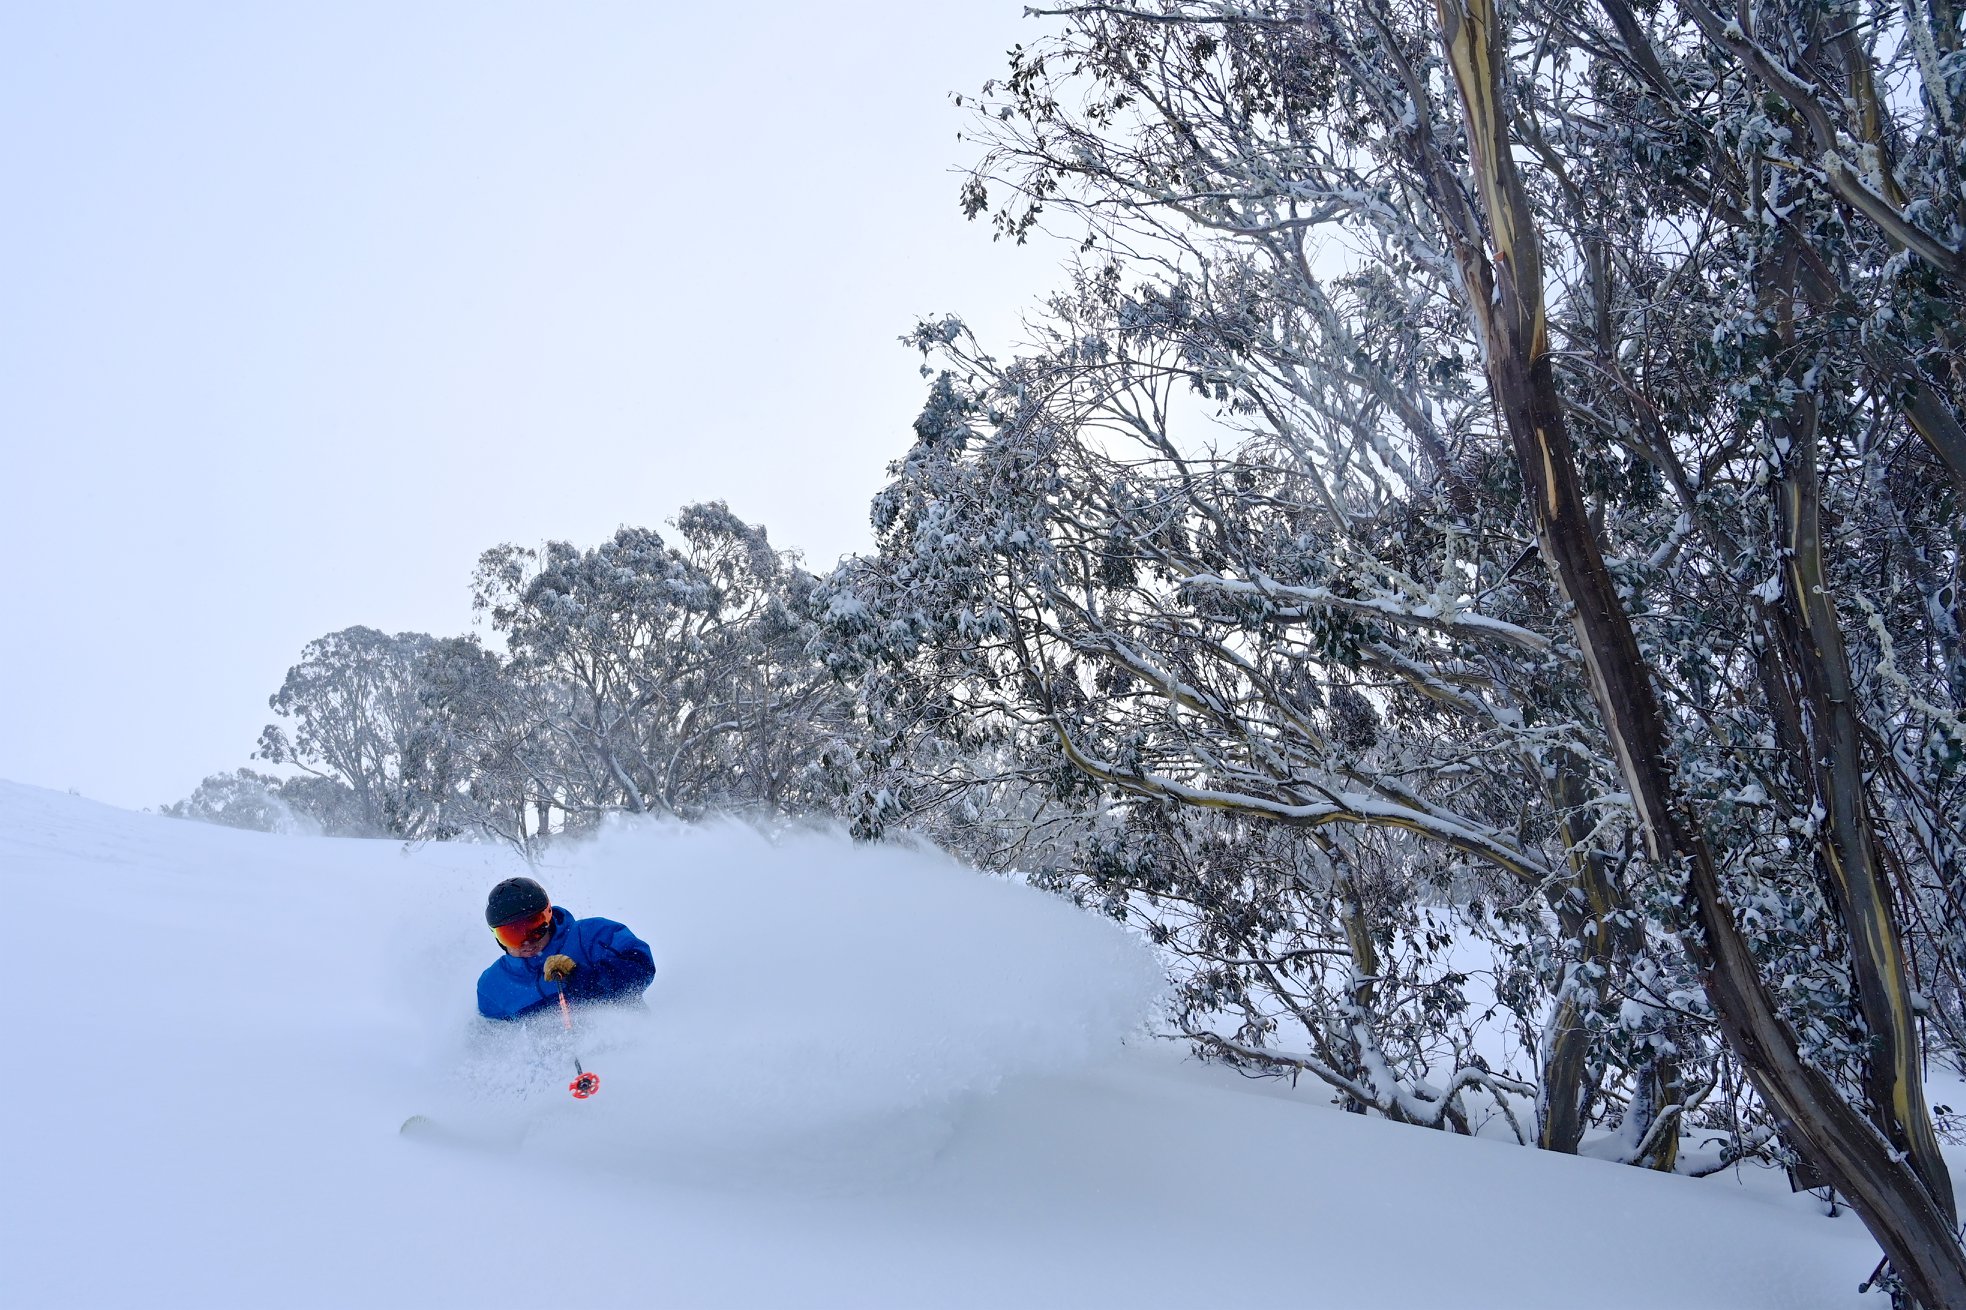 20cm in the past 24 hours., Mount Hotham